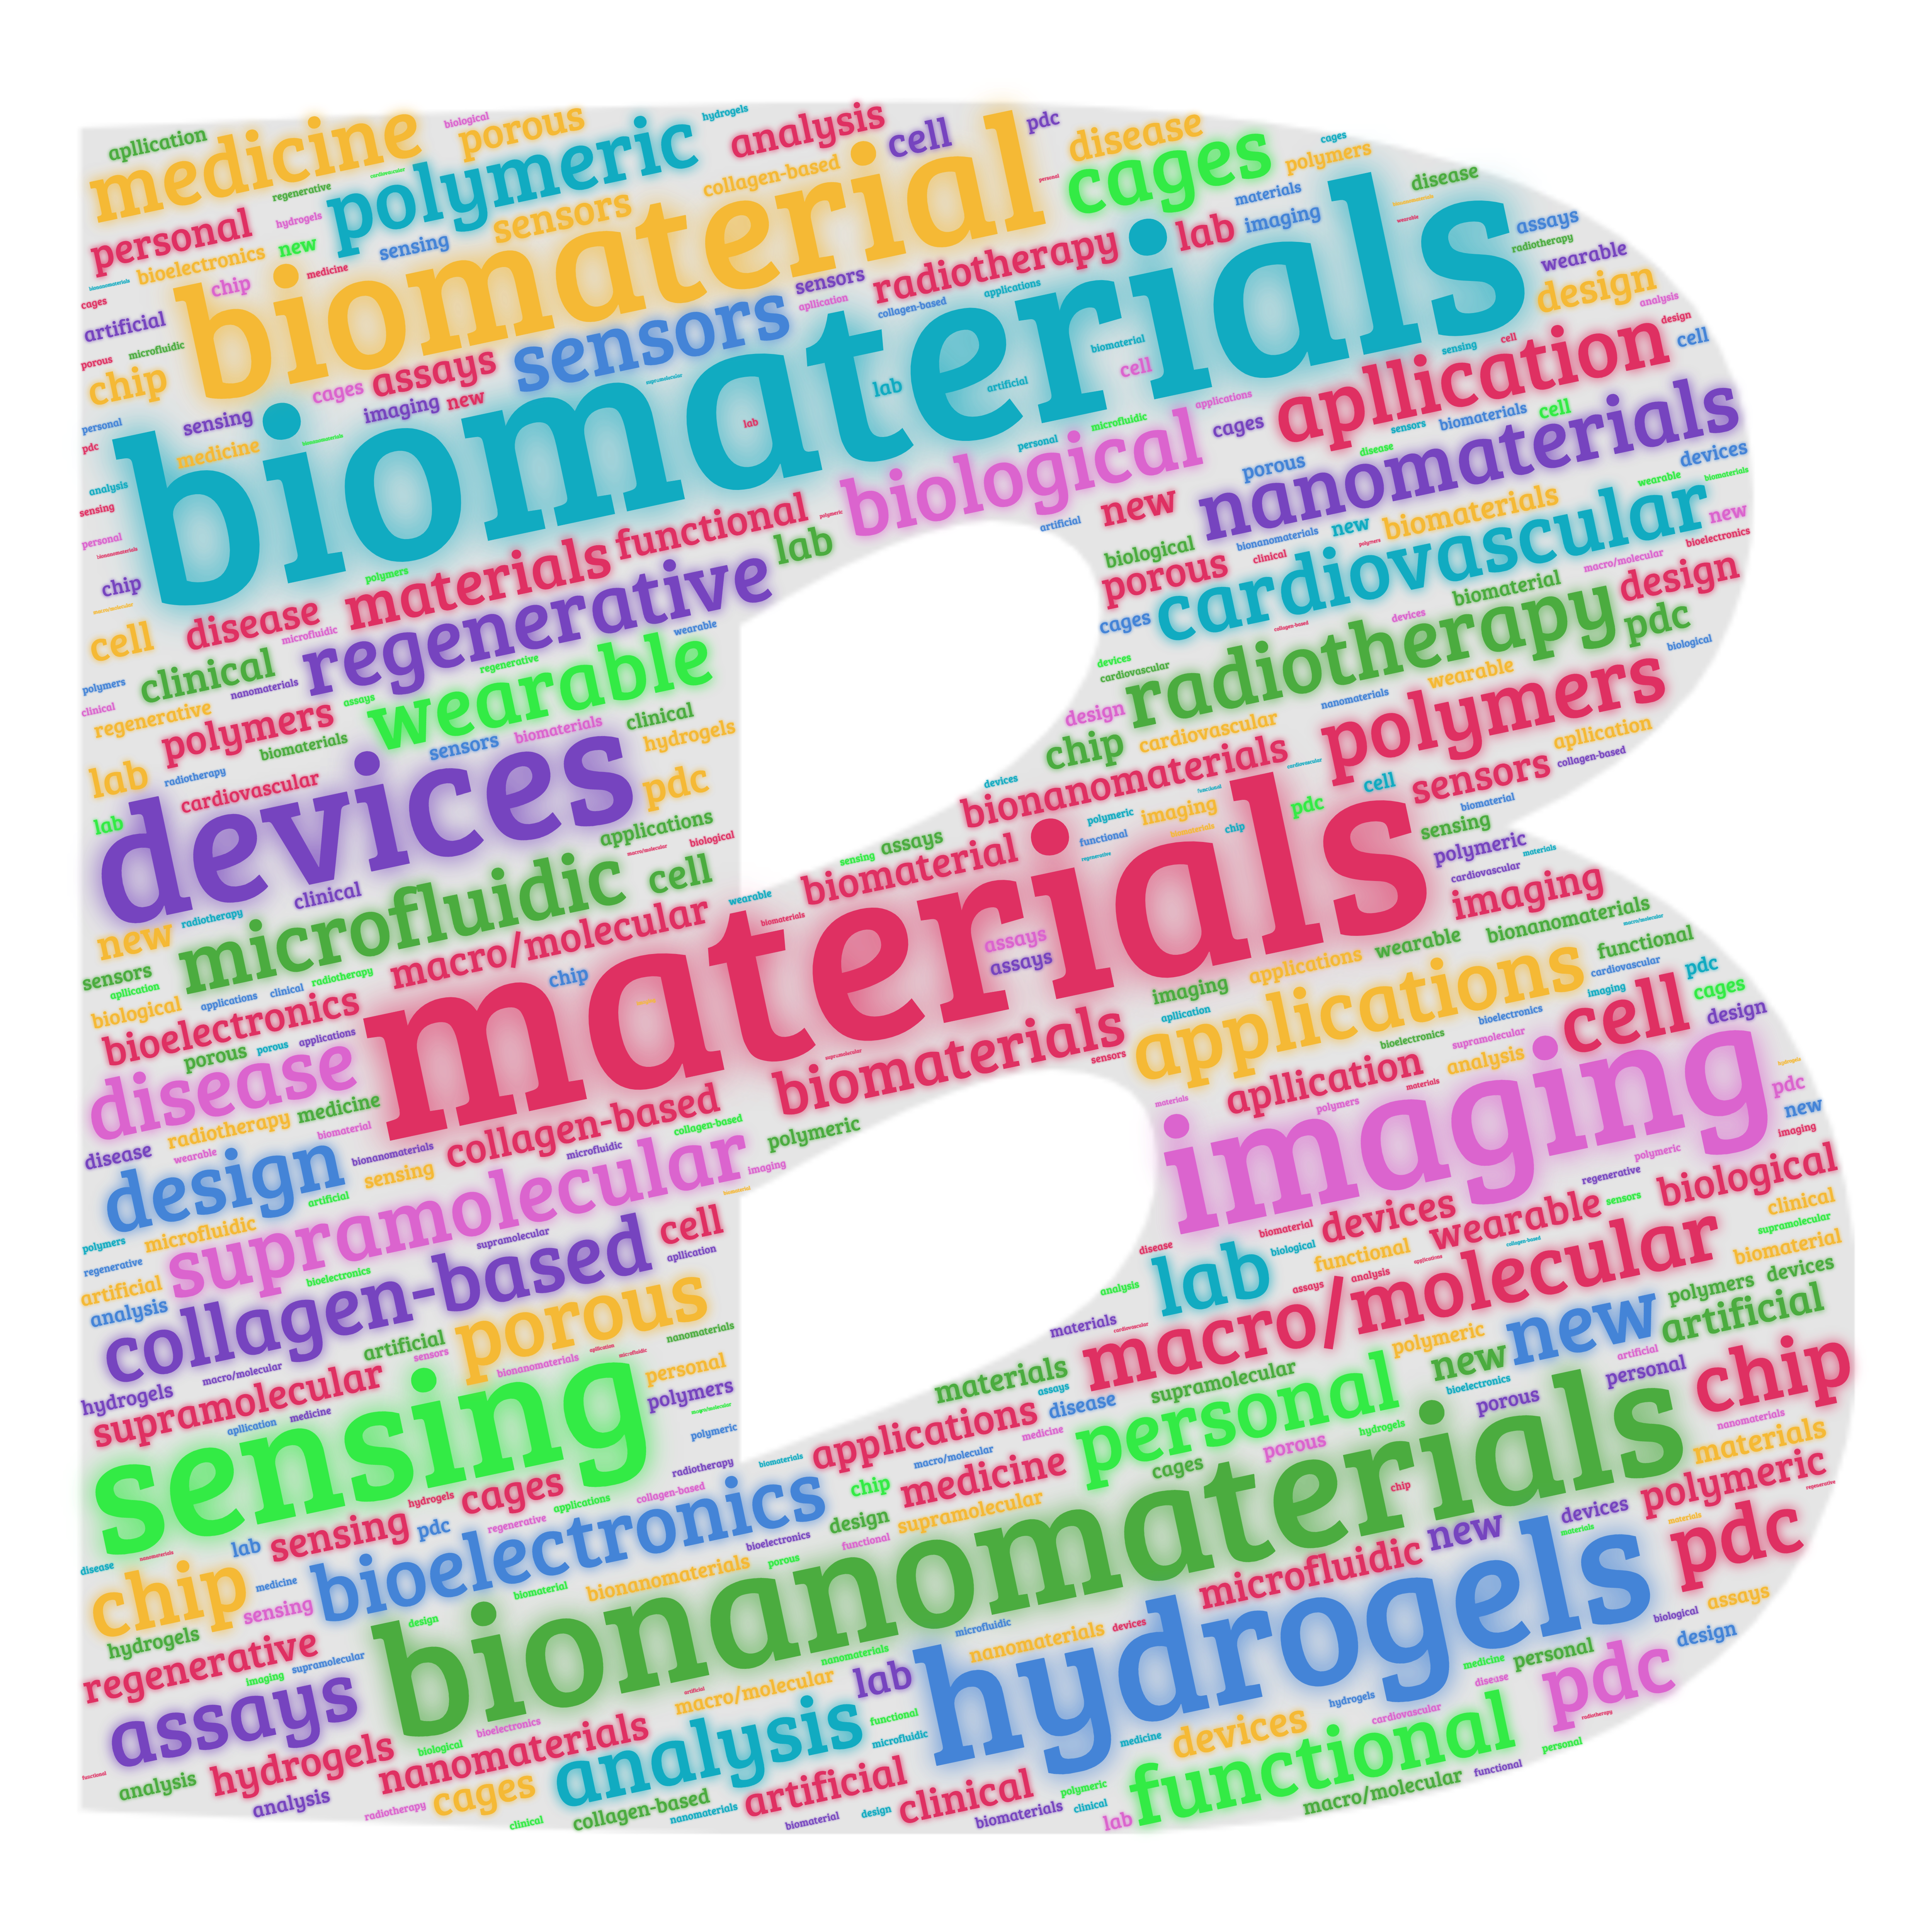 The letter 'B' filled with multicoloured words from survey responses. Biomaterials, Materials, Nanomaterials, Imaging, Hydrogels, Devices, Sensing, Microfluidic, Polymeric, Regenerative.